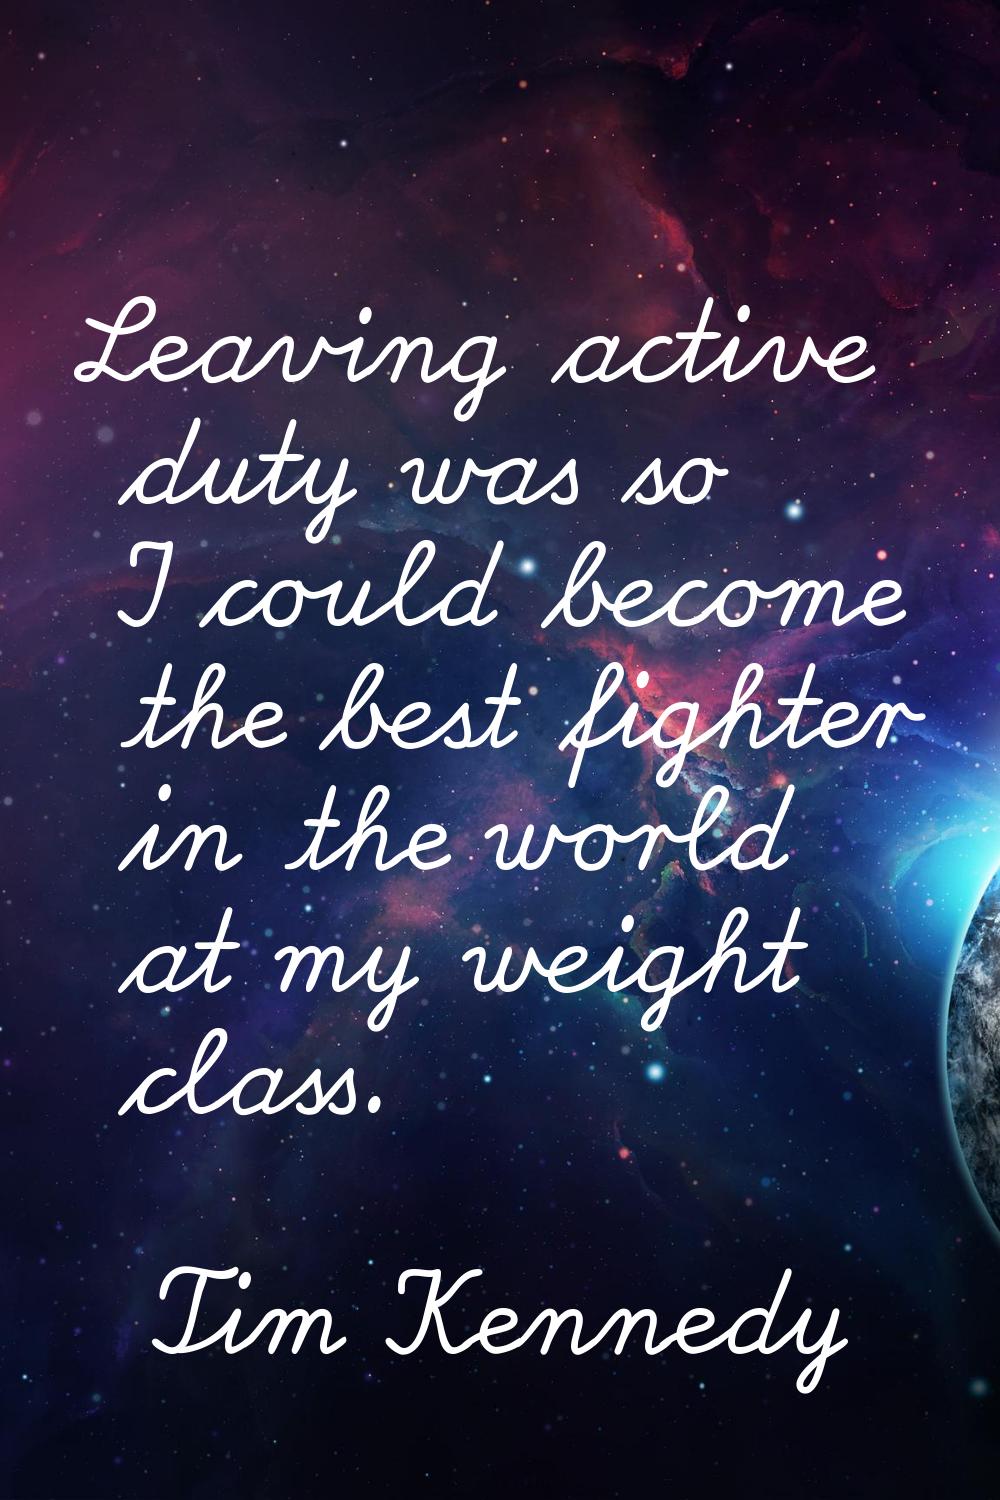 Leaving active duty was so I could become the best fighter in the world at my weight class.